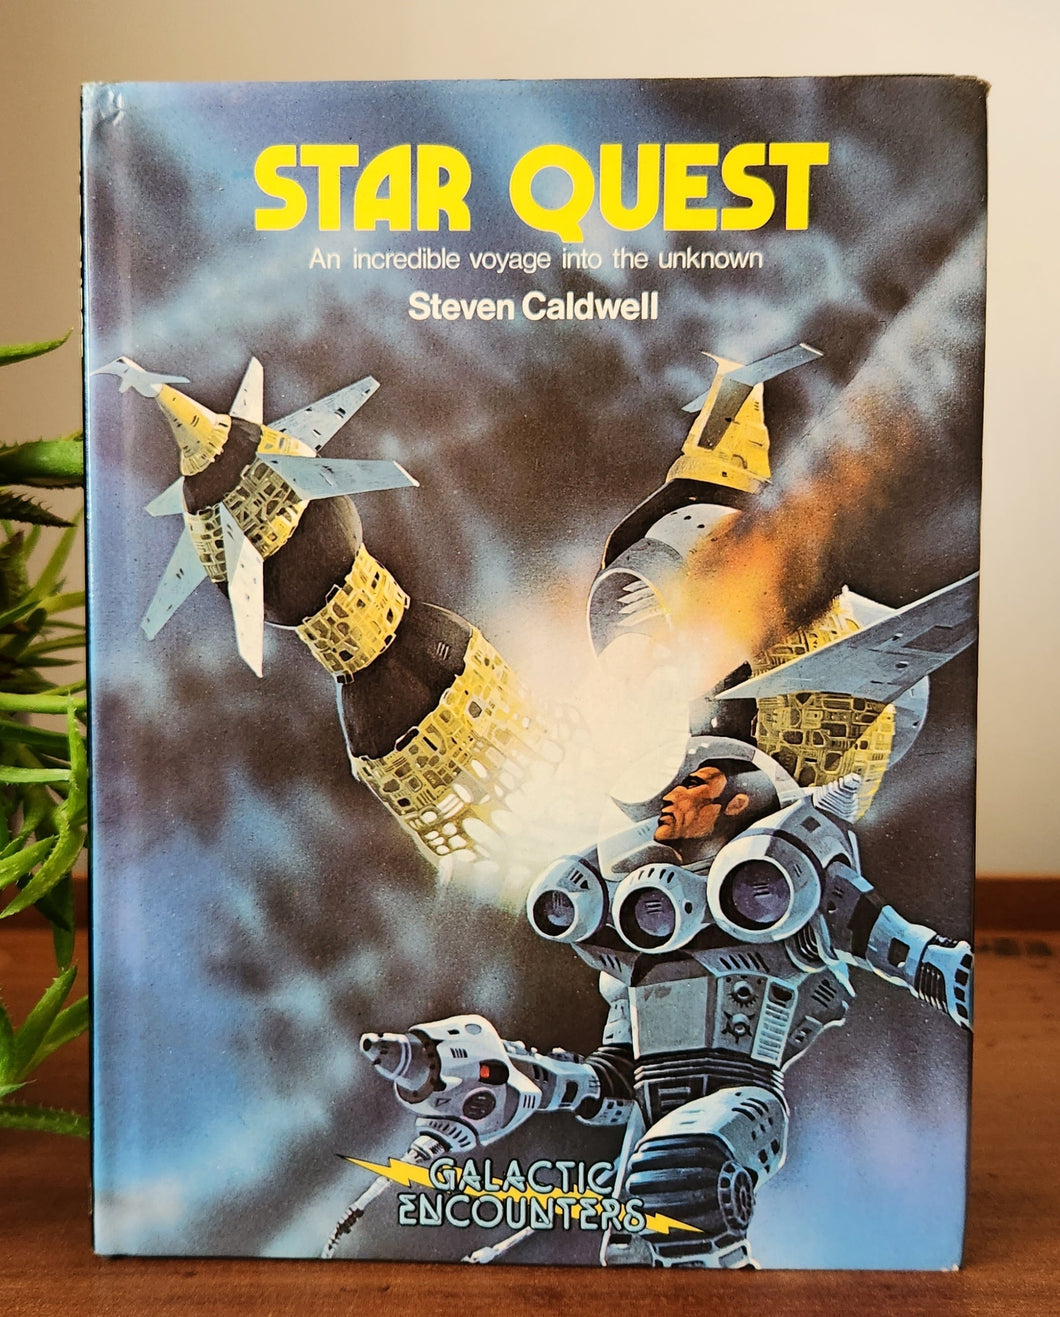 Star Quest: An Incredible Voyage Into the Unknown by Steven Caldwell